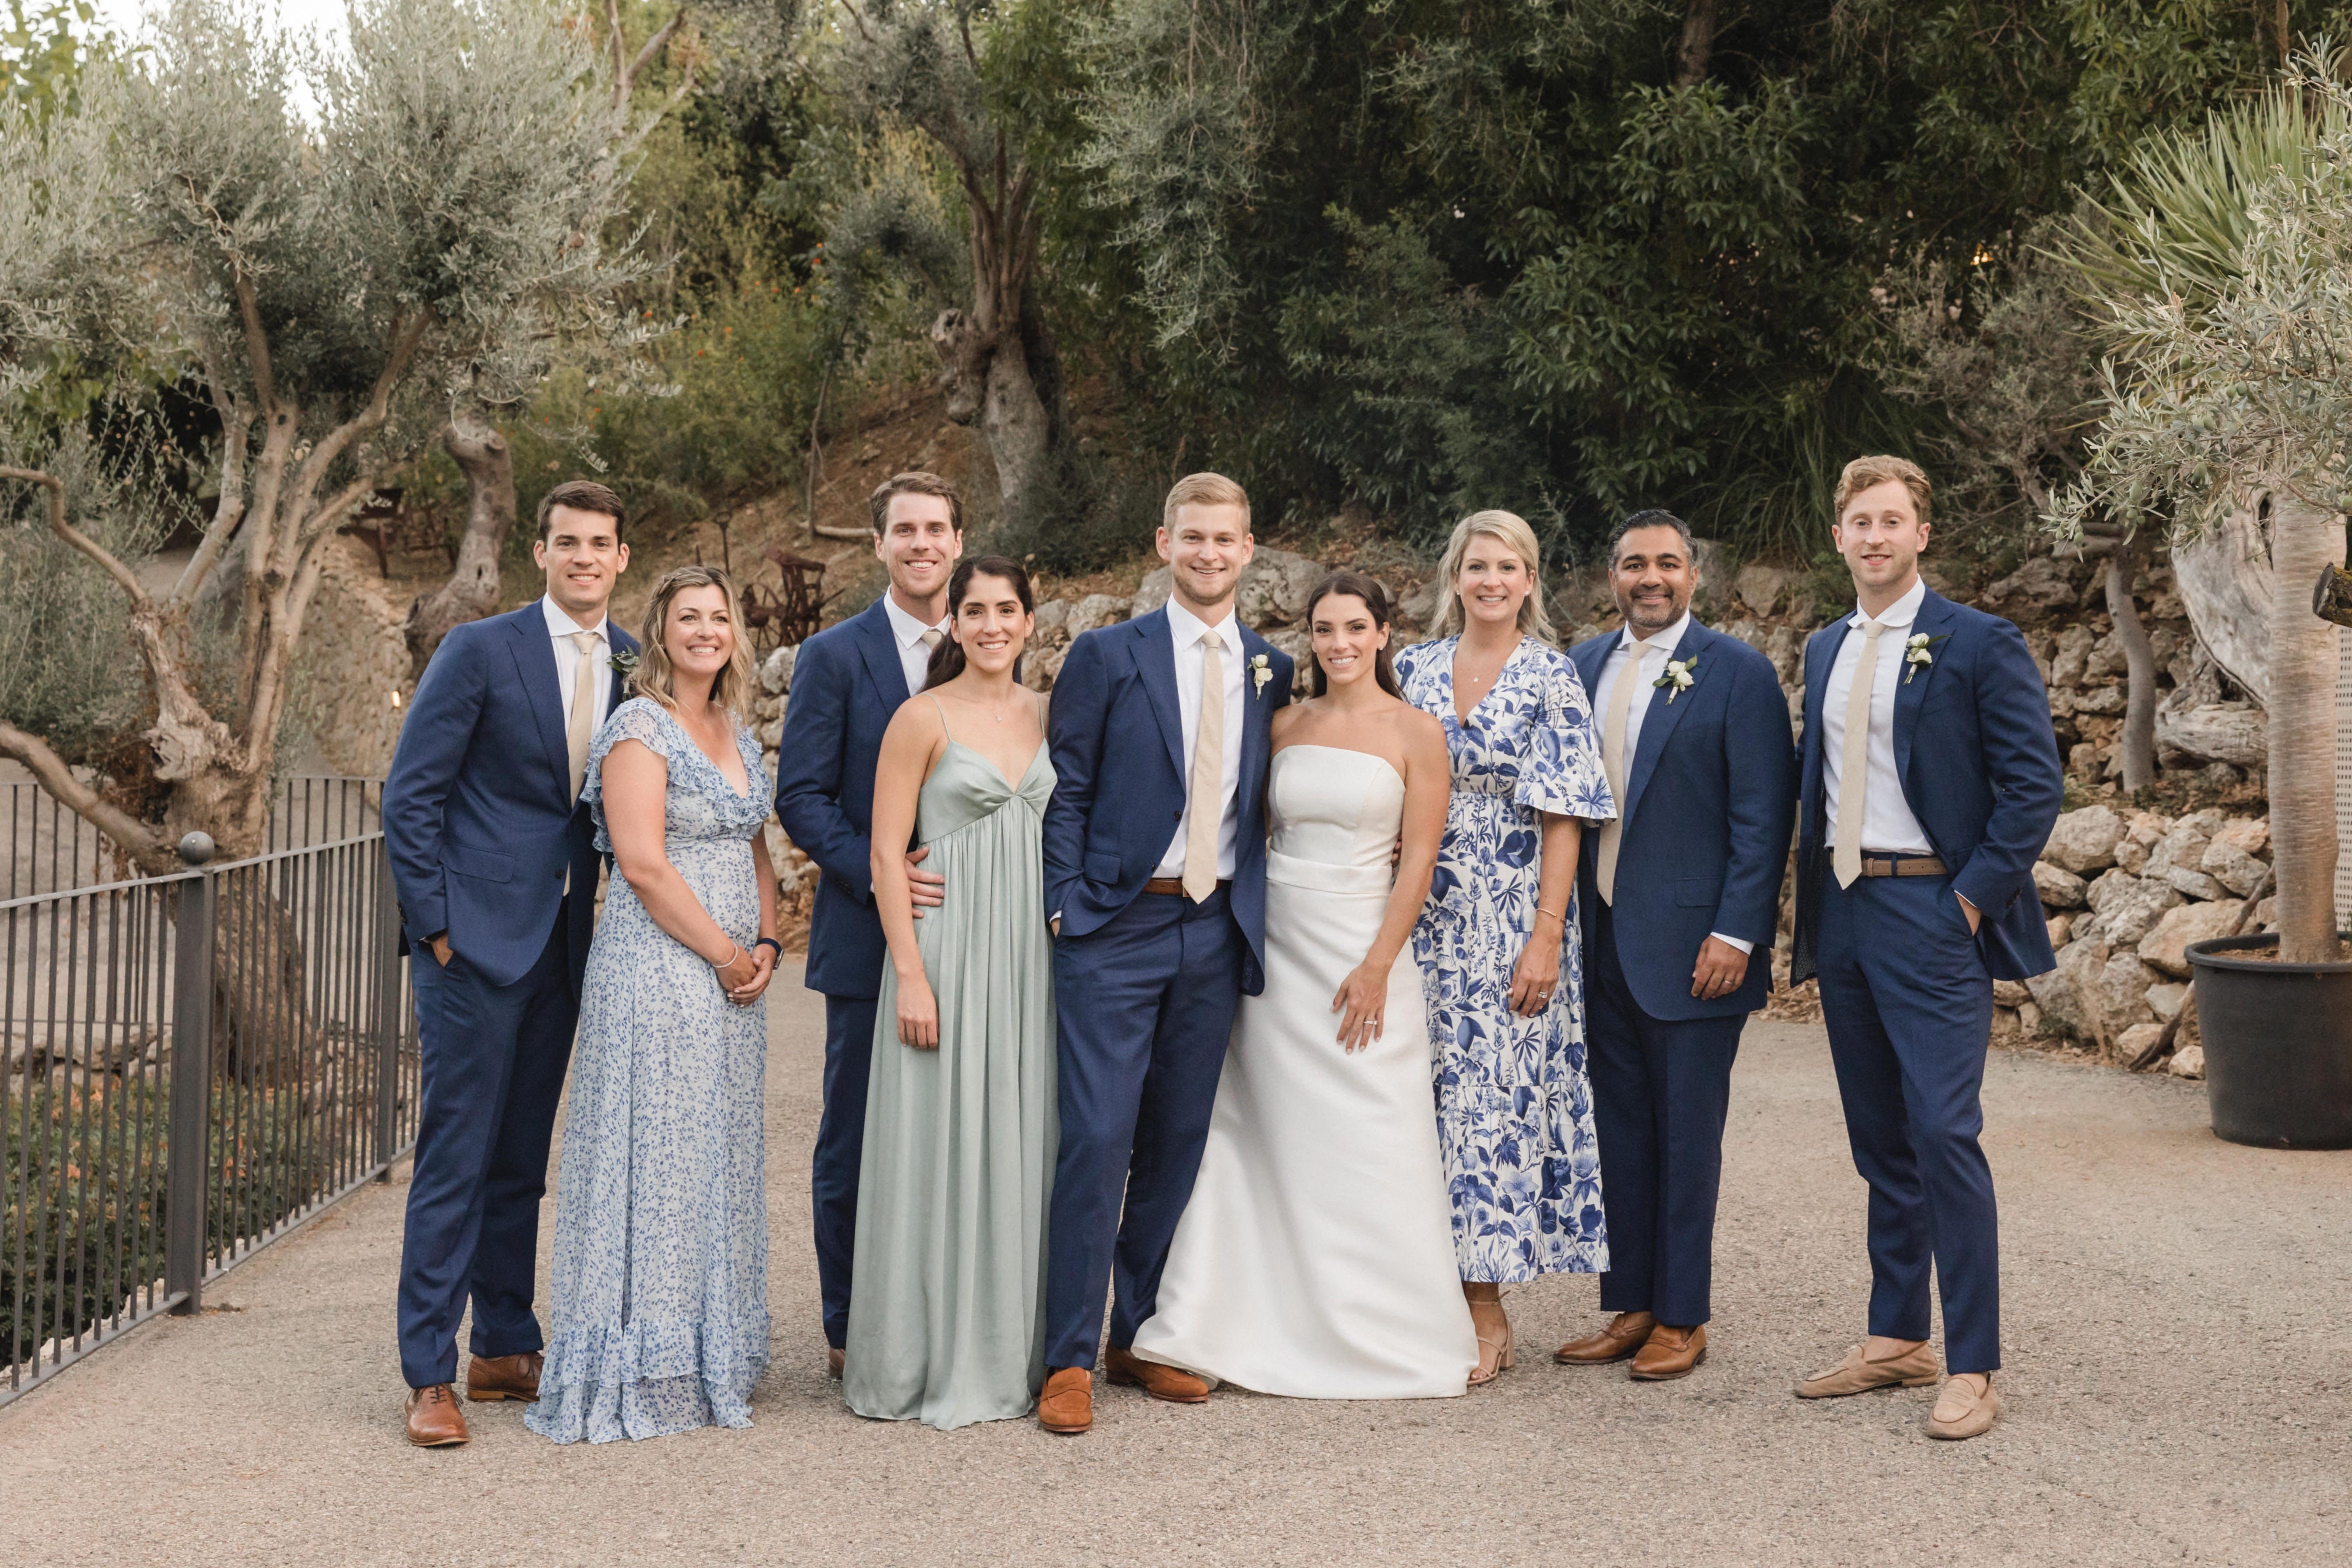 Cristina Meneses '15 and Ryan Aceto '14 pose with family at their wedding